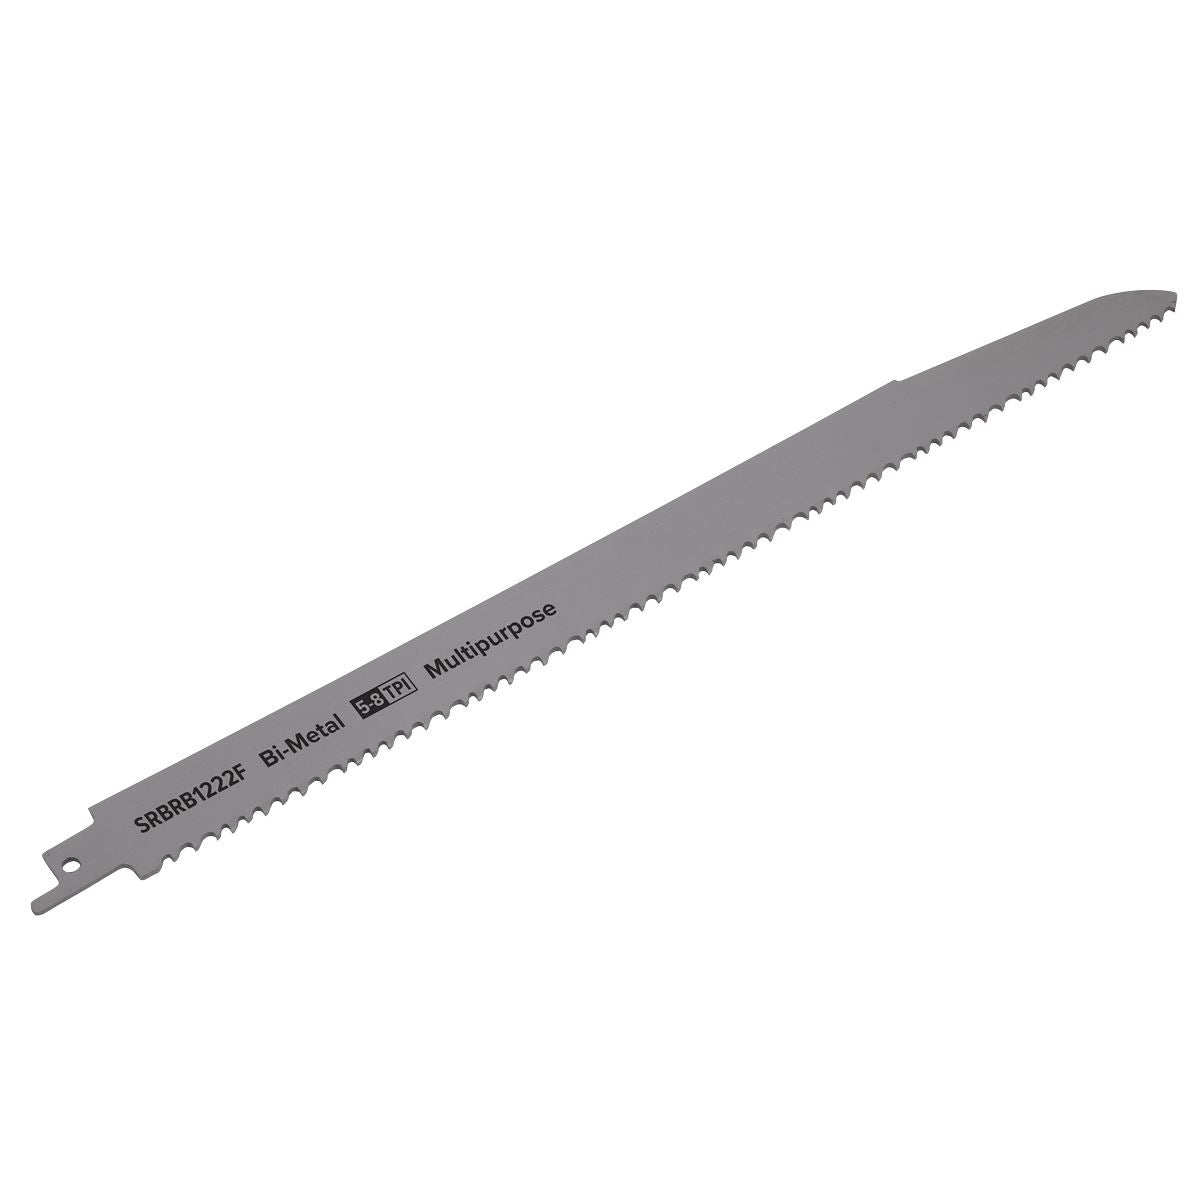 Sealey Reciprocating Saw Blade Multipurpose 300mm 5-8tpi - Pack of 5